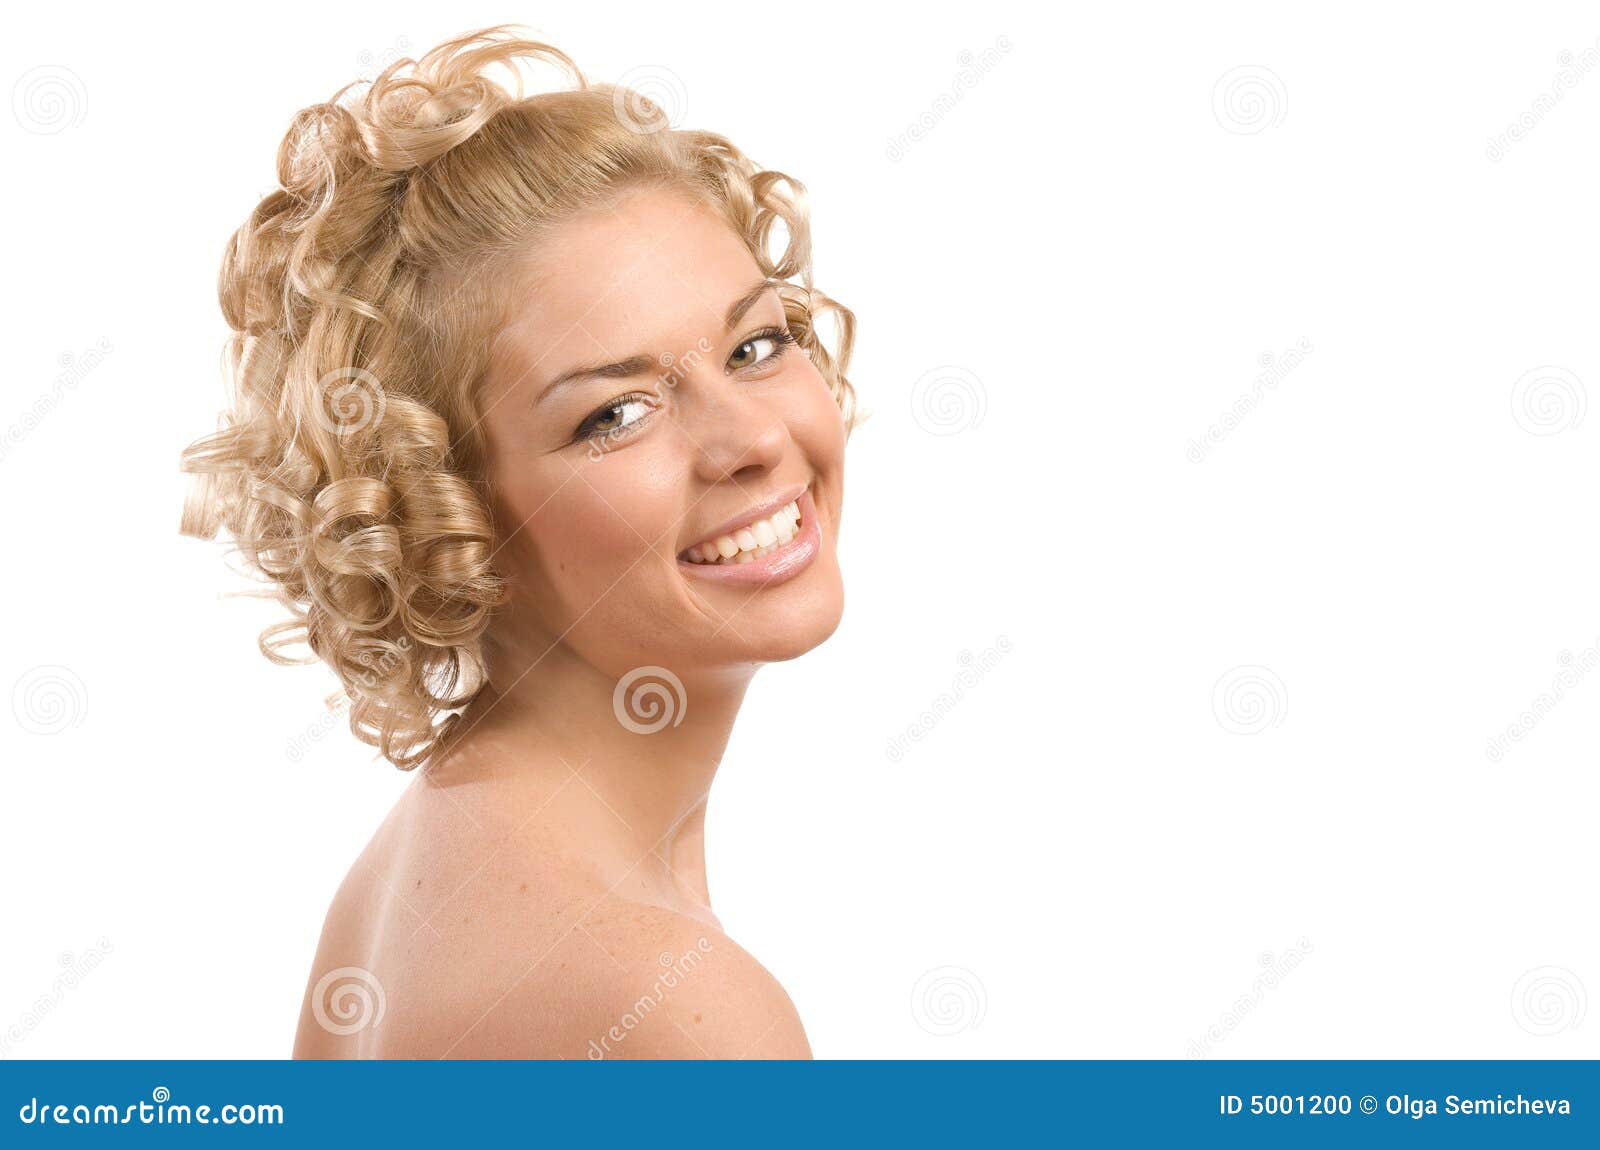 Curly Blonde Haircuts - wide 5